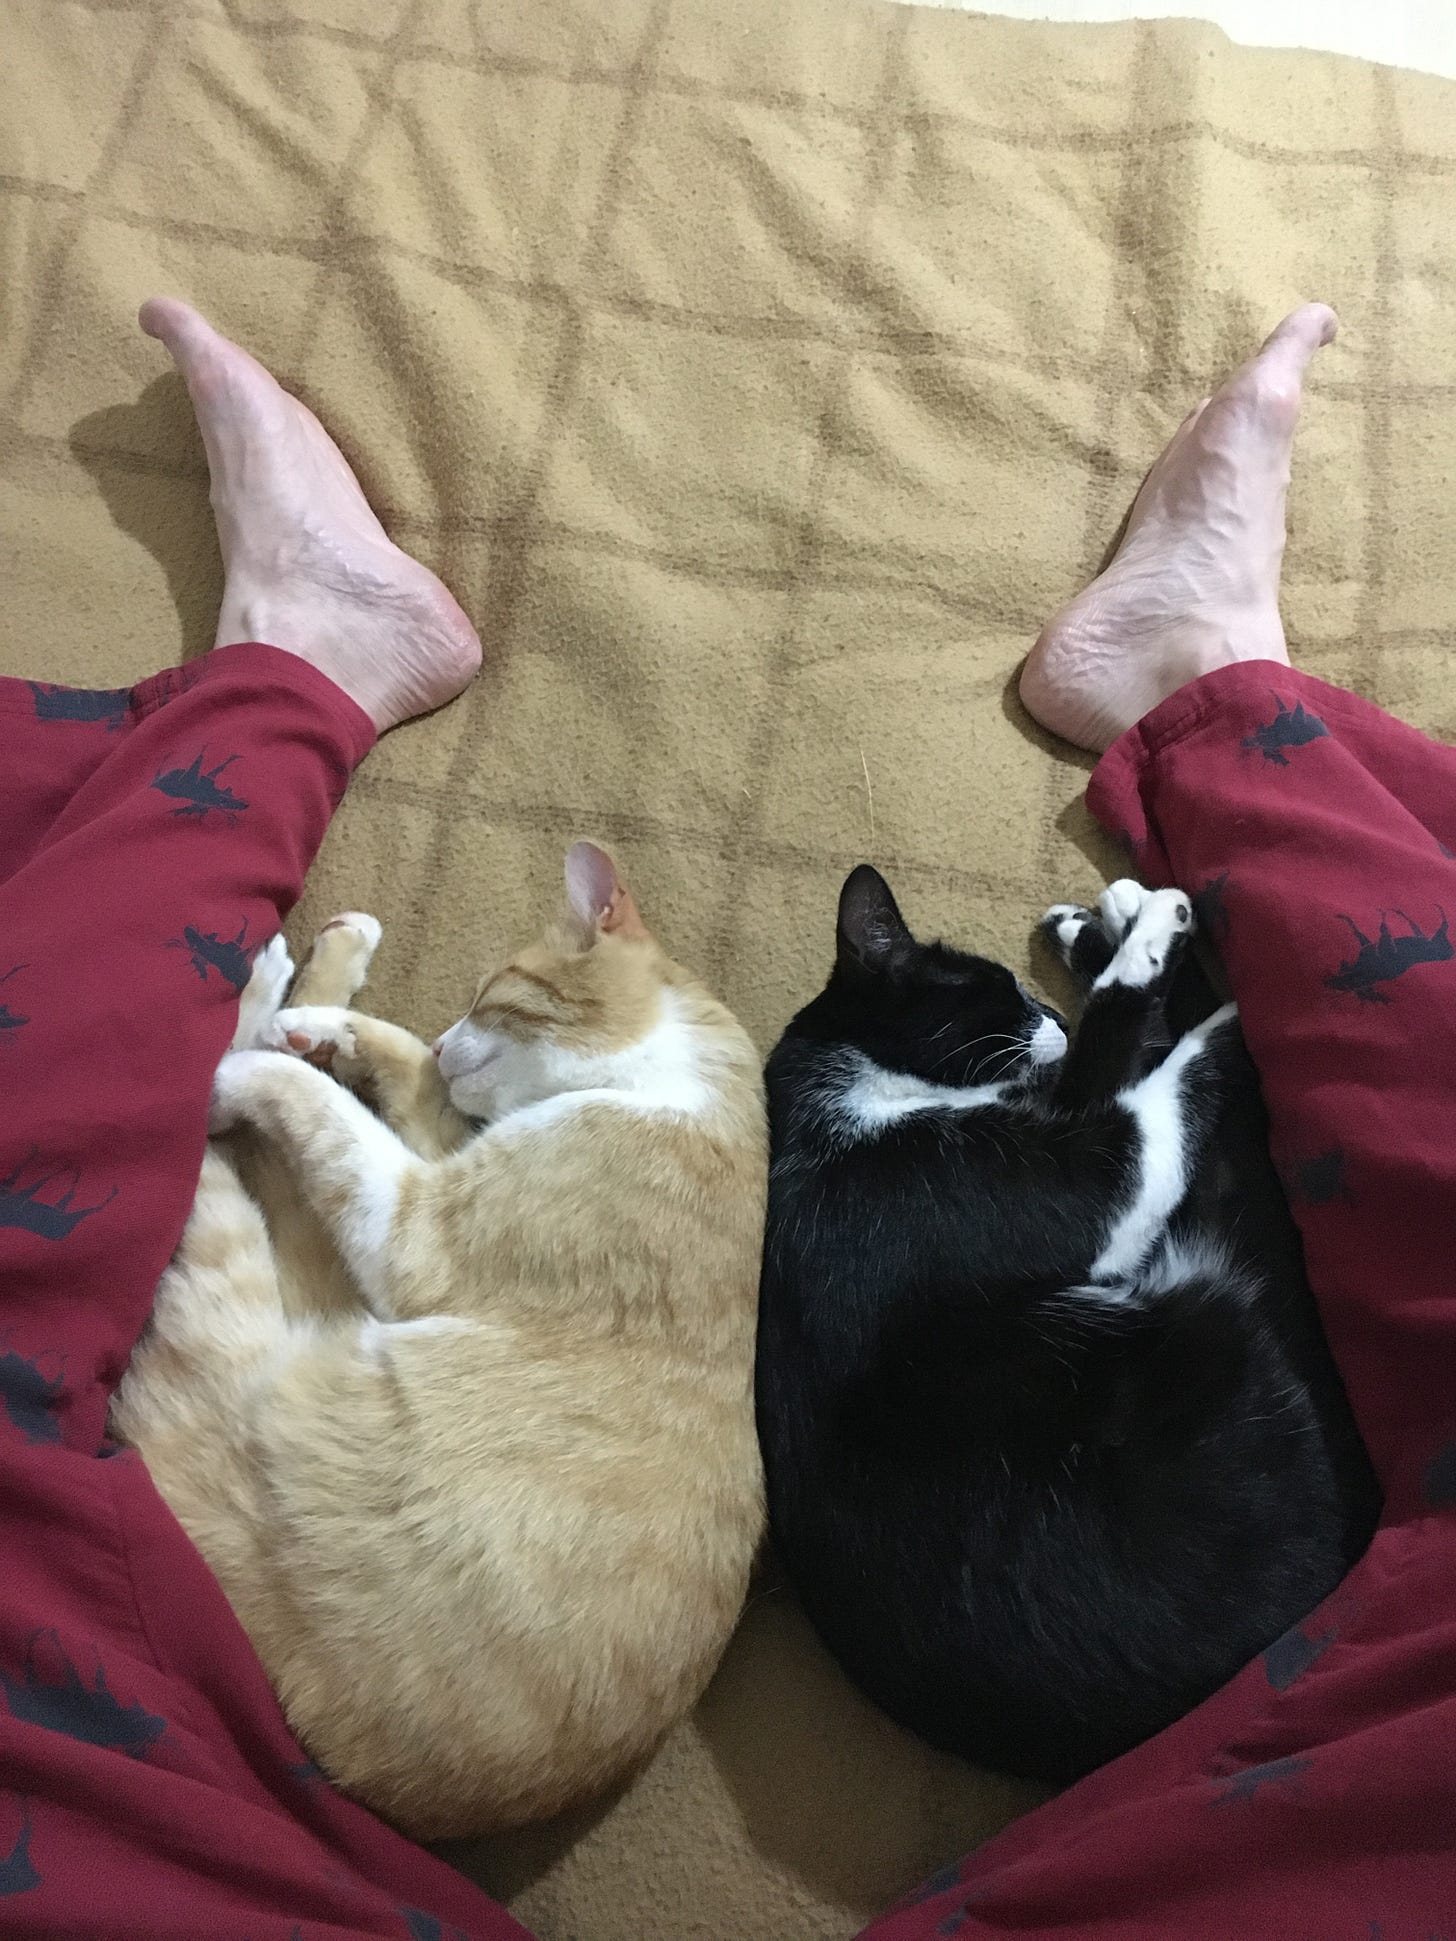 Two cats, a tuxedo and ginger, sleeping back to back in the space between two legs, mine, wearing red pyjamas, on a bed with a brown blanket.